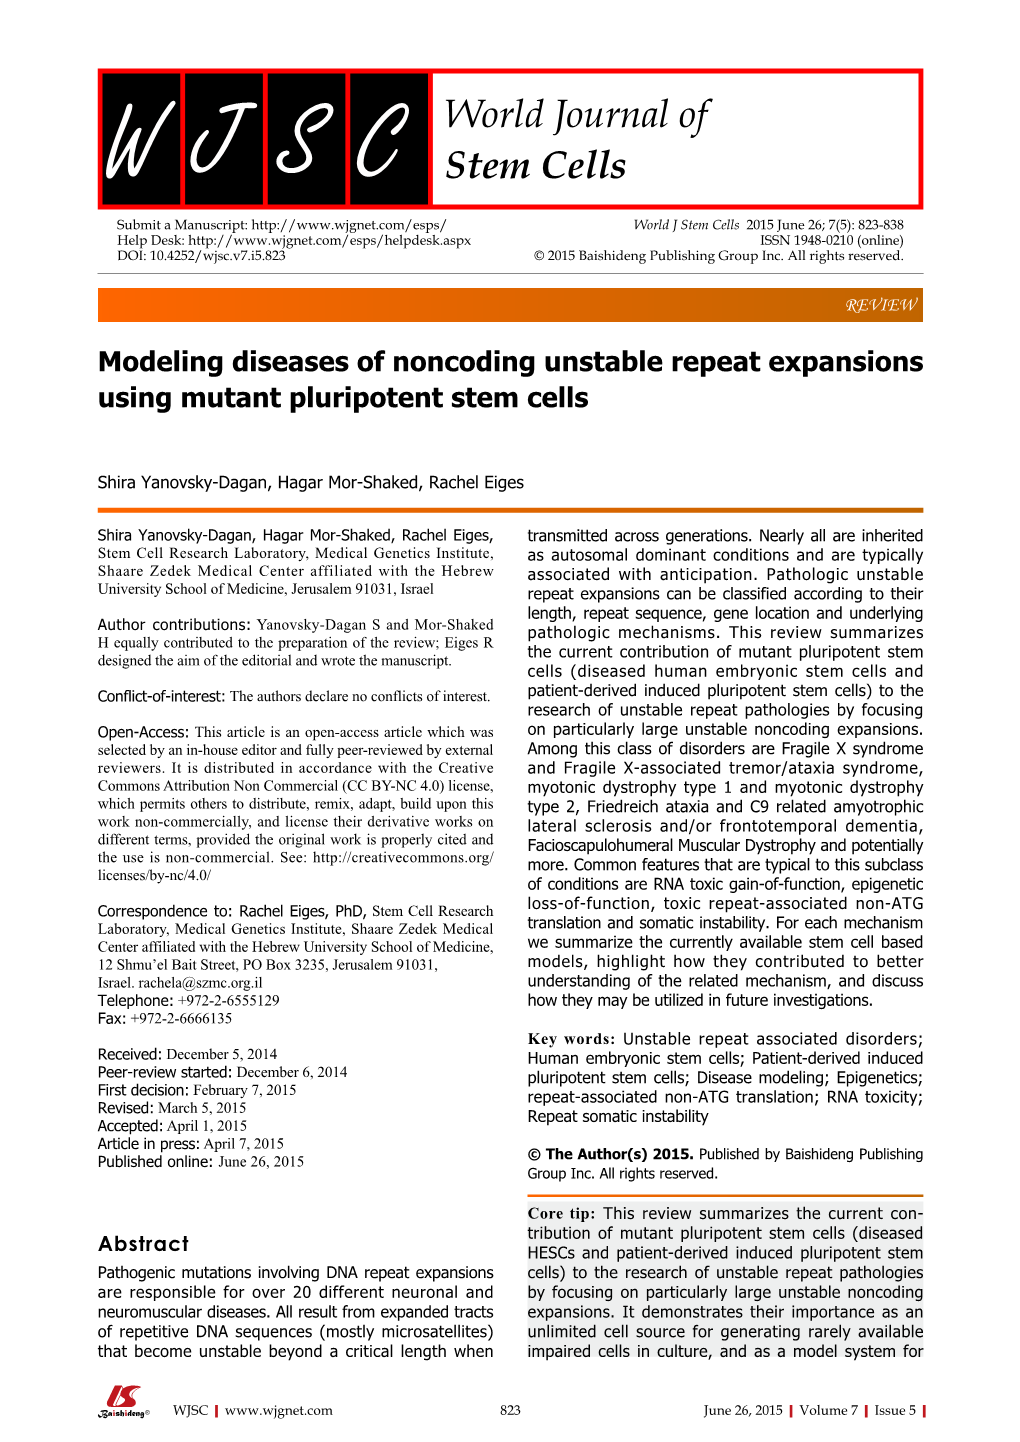 Modeling Diseases of Noncoding Unstable Repeat Expansions Using Mutant Pluripotent Stem Cells